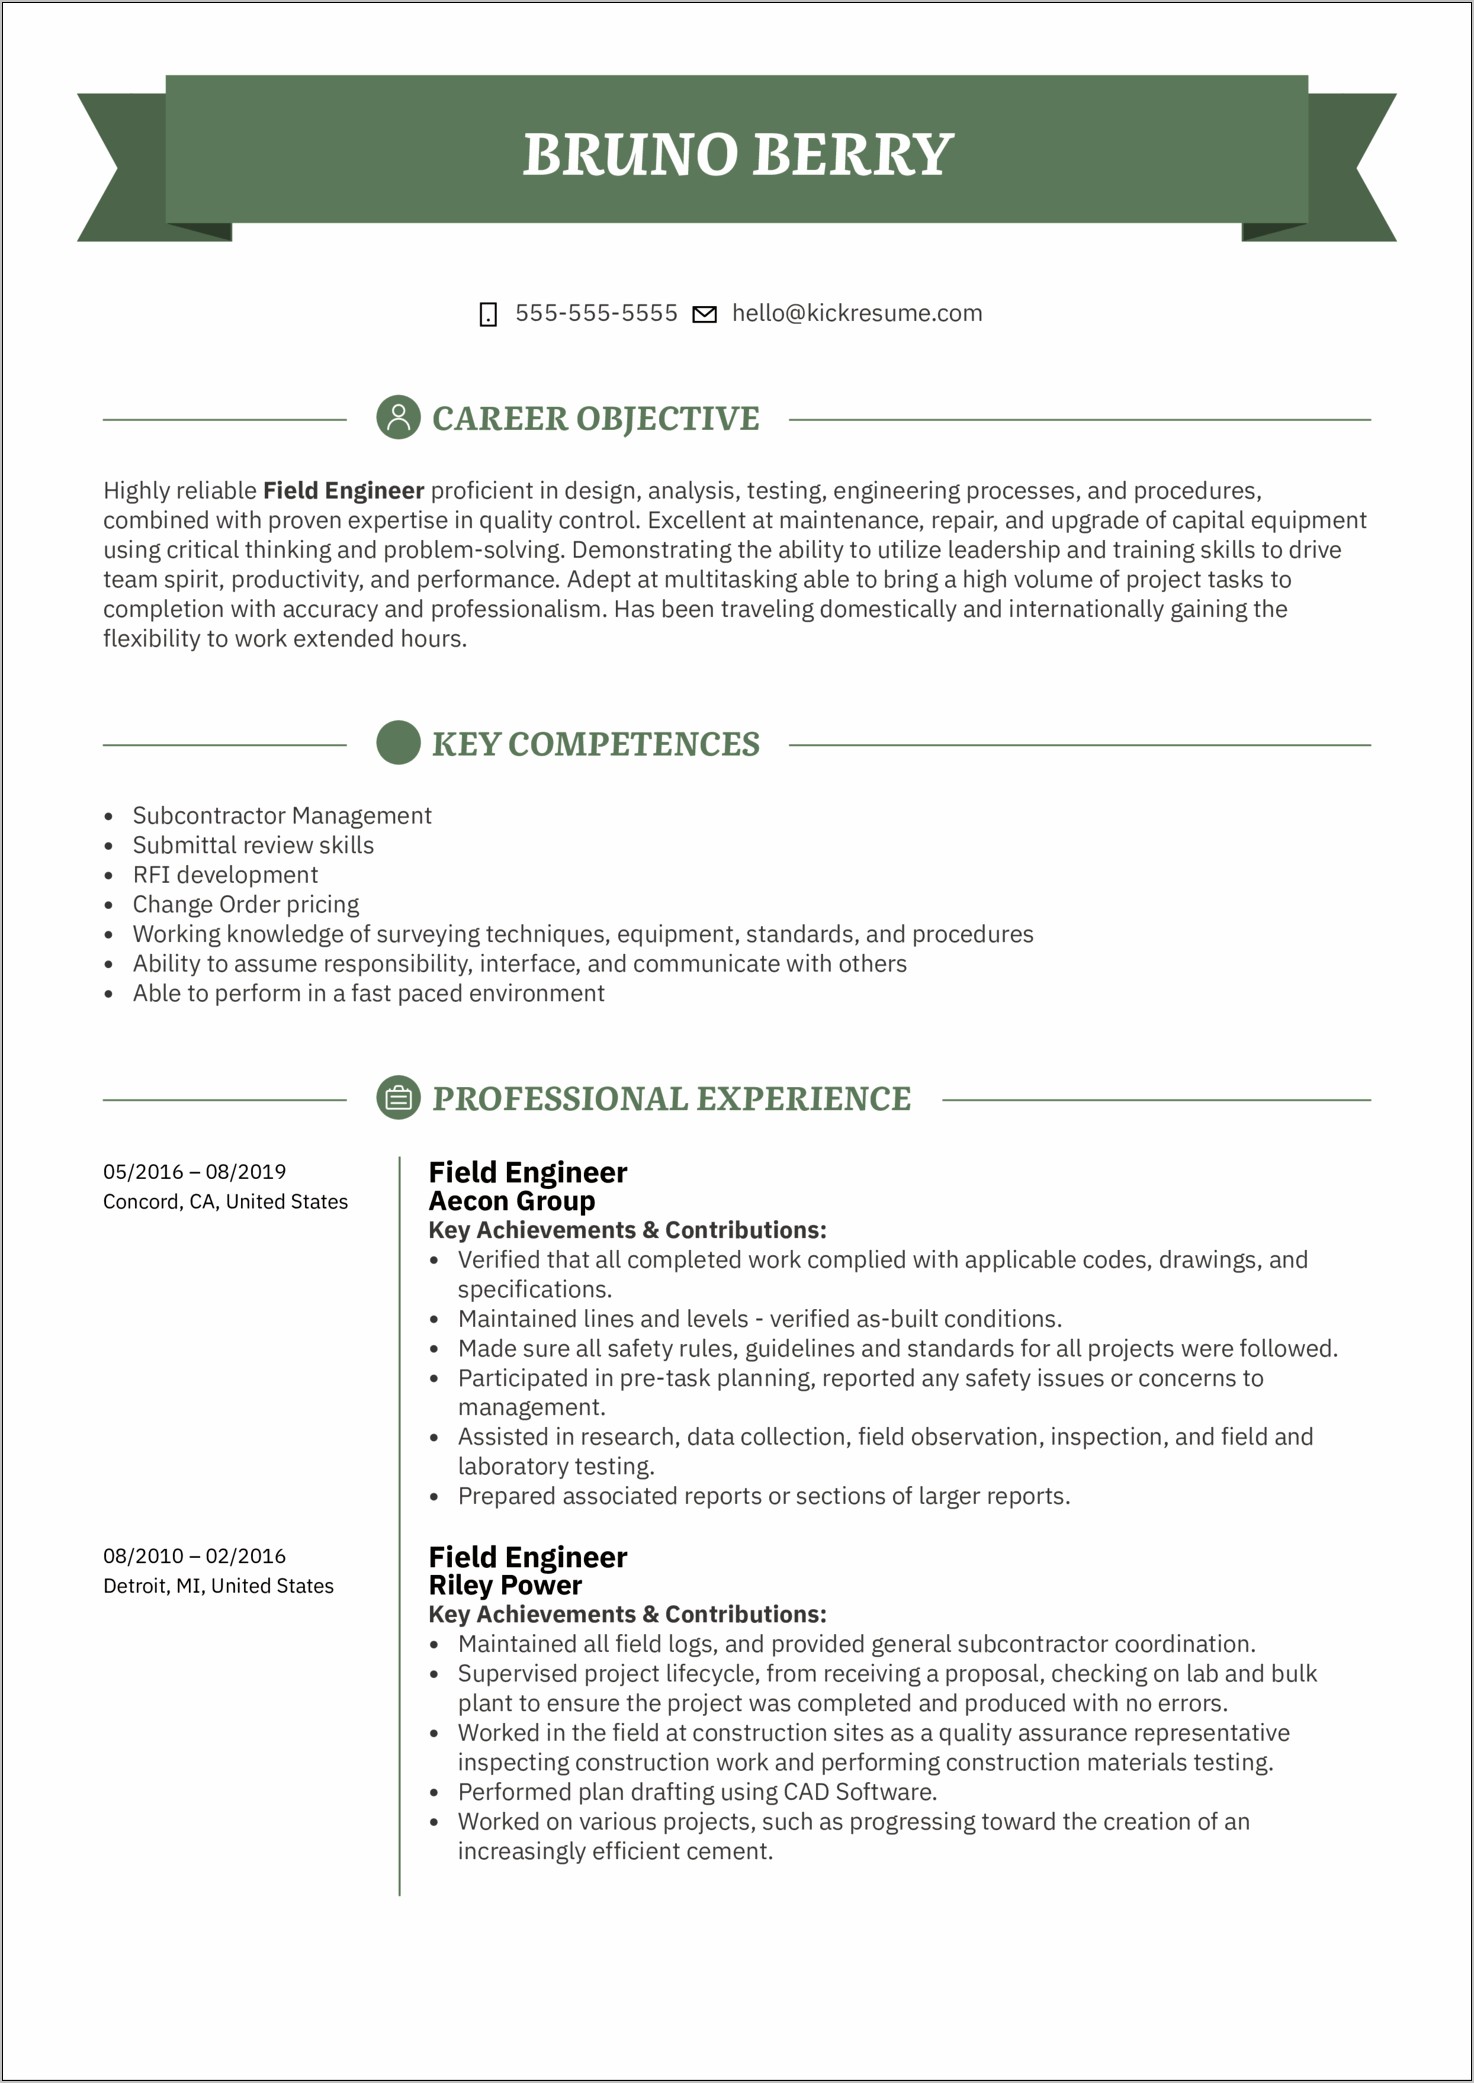 Examples Of Professional Accomplishments For Resume